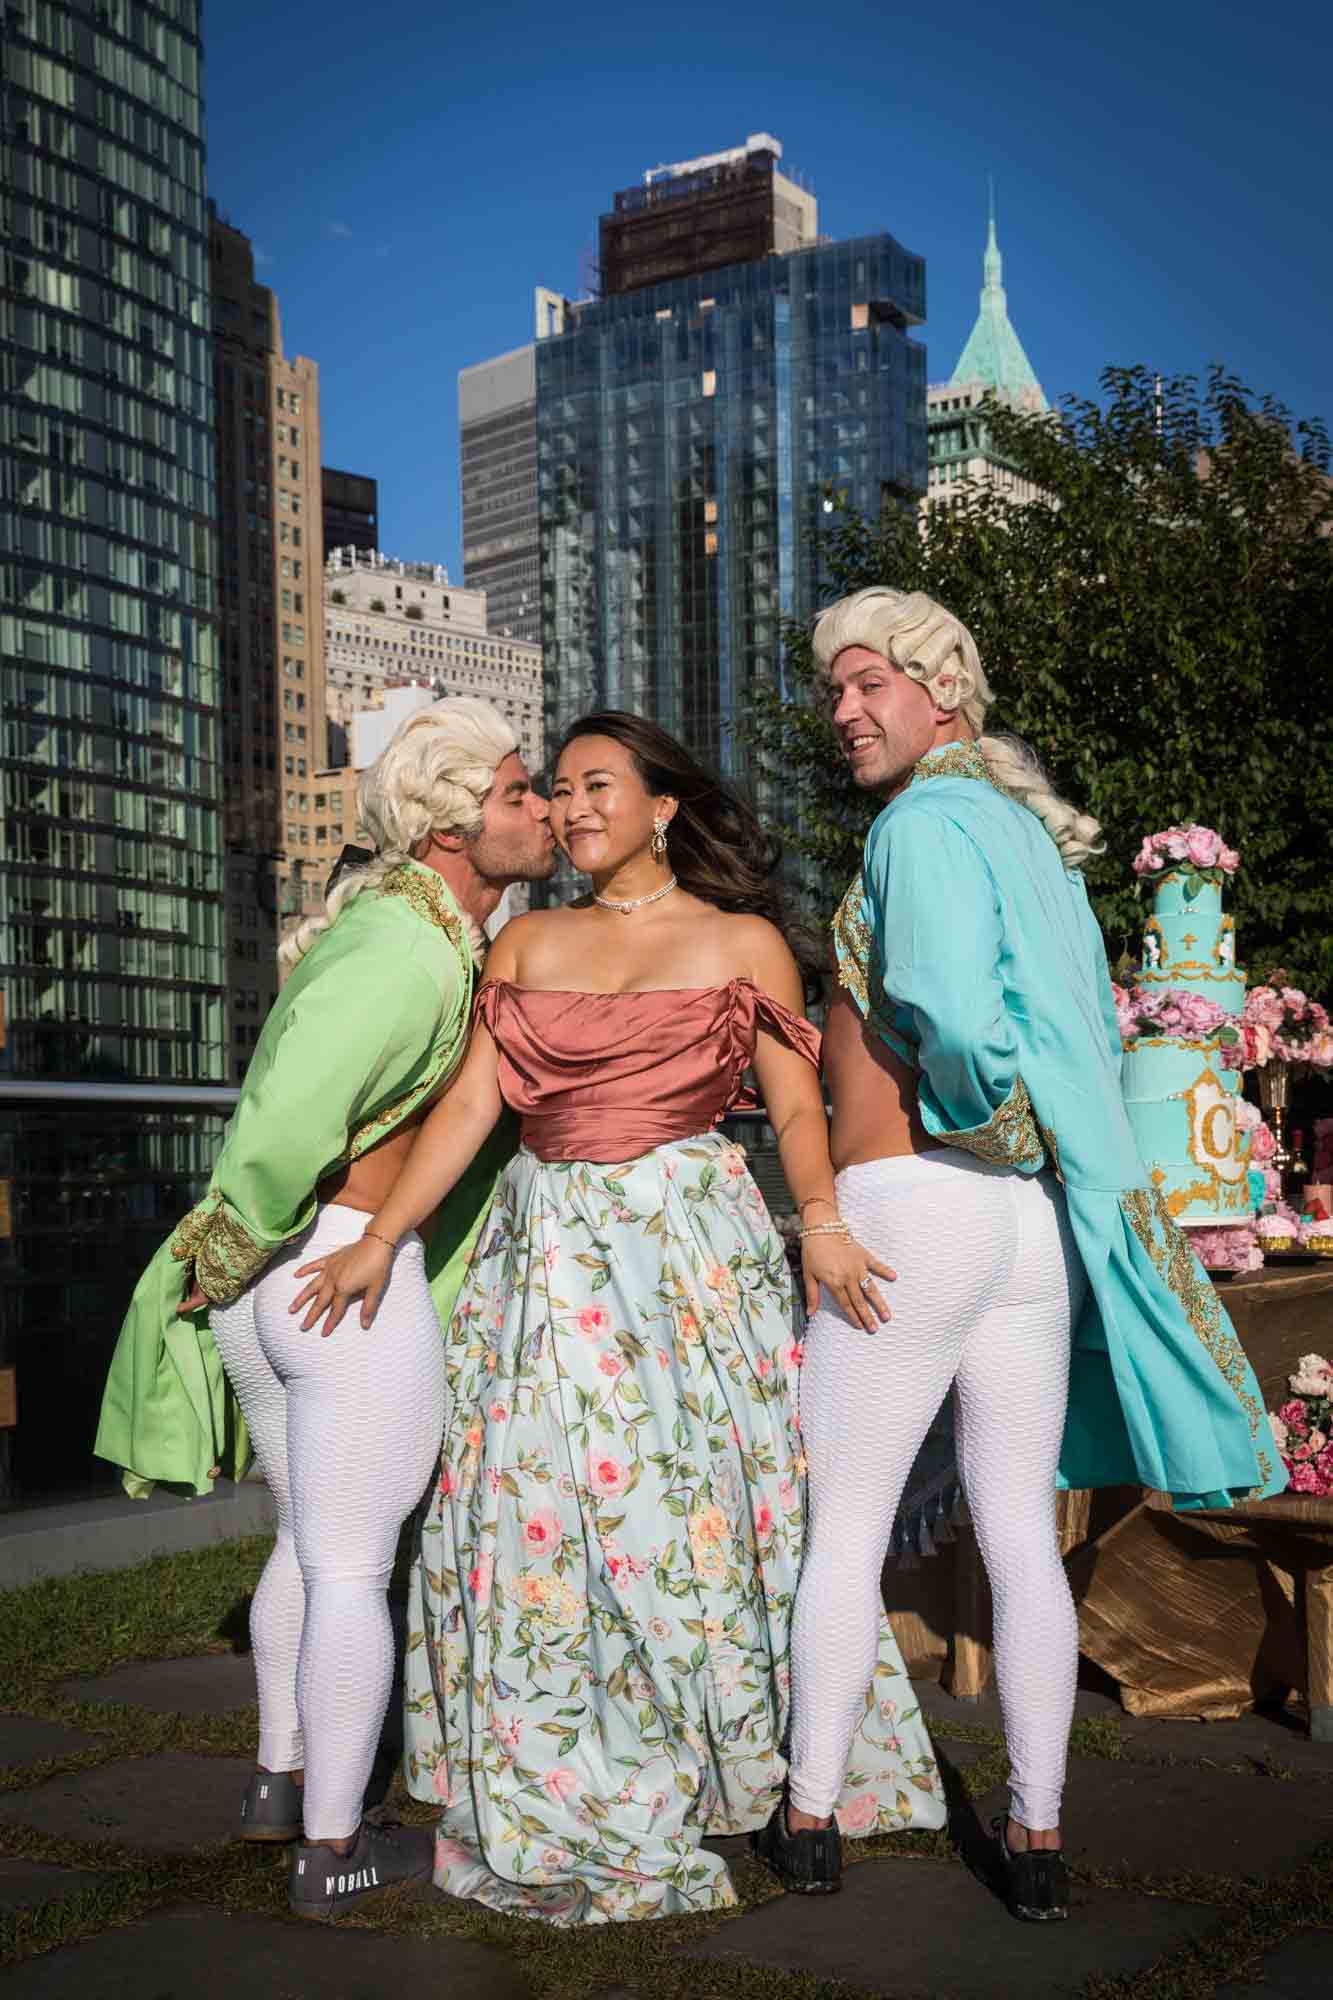 Woman dressed as Marie Antoinette with hands on the butts of men dressed as French courtiers for an article on event planning photography tips